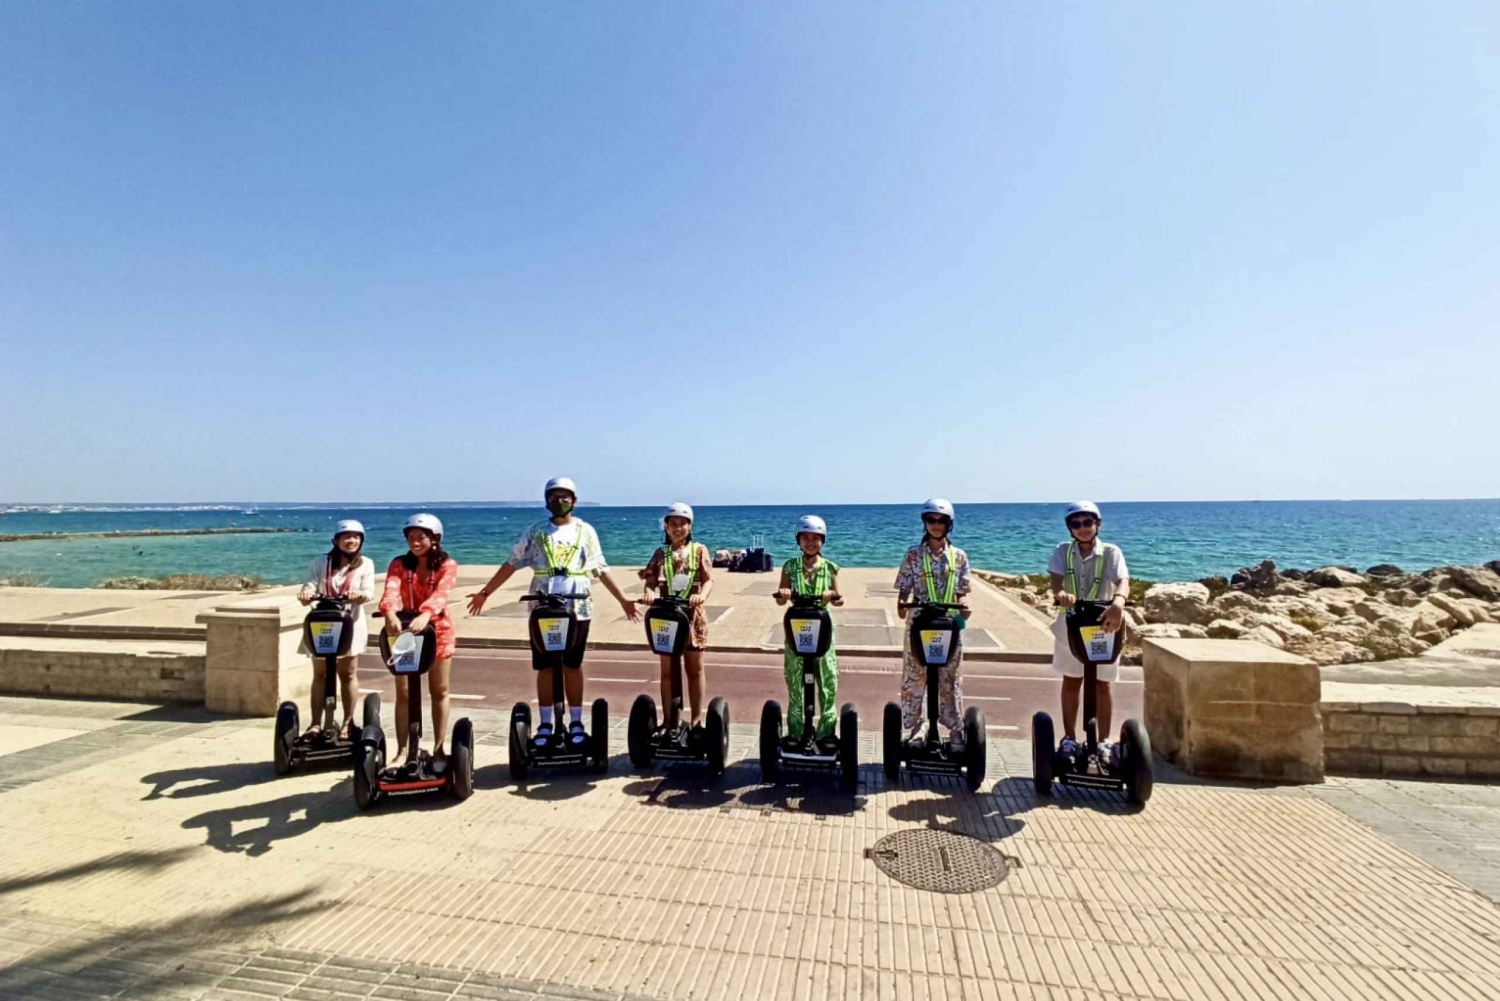 Palma de Mallorca: Sightseeing Segway Tour with Local Guide